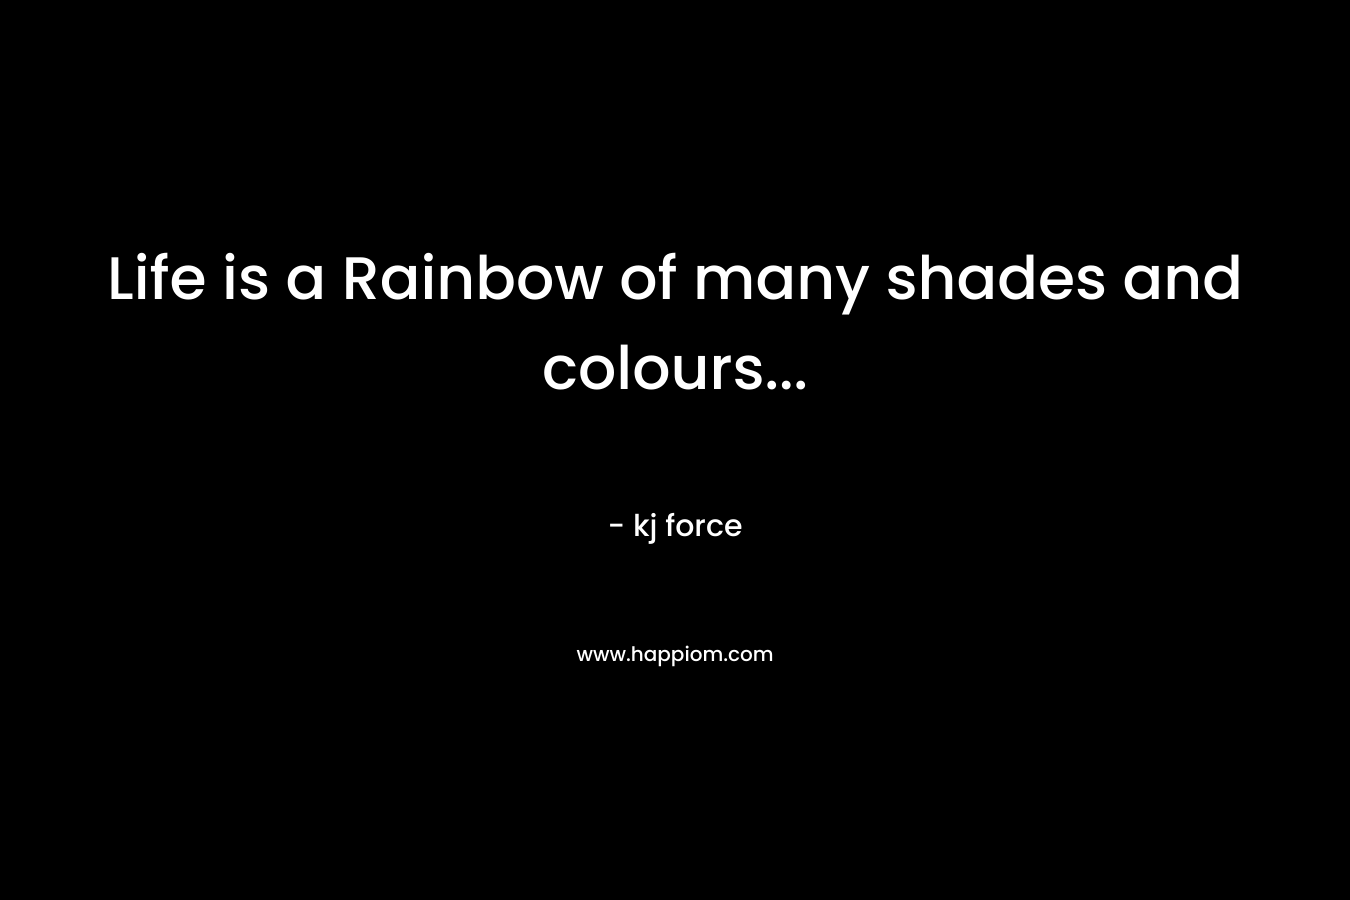 Life is a Rainbow of many shades and colours...